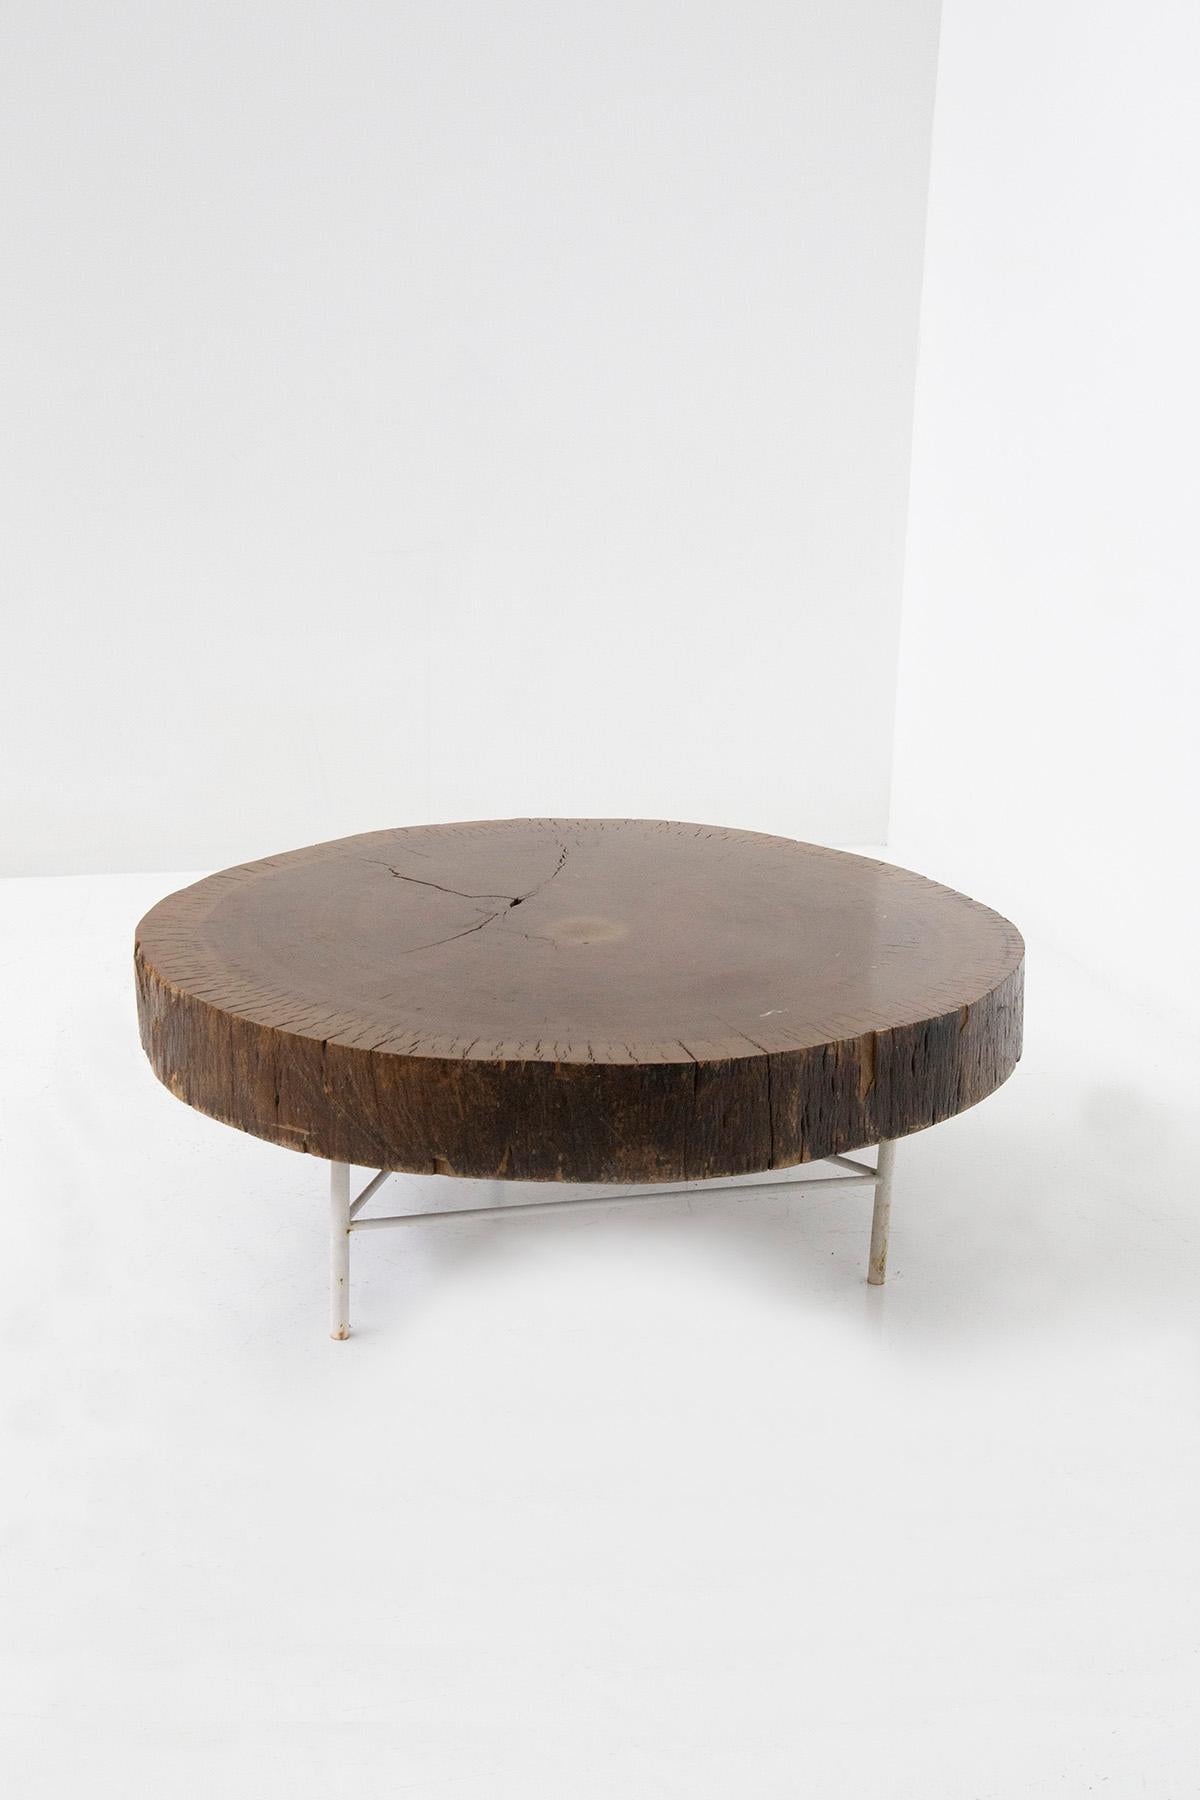 The Tronco coffee table, a masterpiece conceived by visionary Ignazio Gardella, is an astonishing creation that transcends simple furniture. Crafted with an extraordinary passion for design and an unwavering reverence for nature, this magnificent